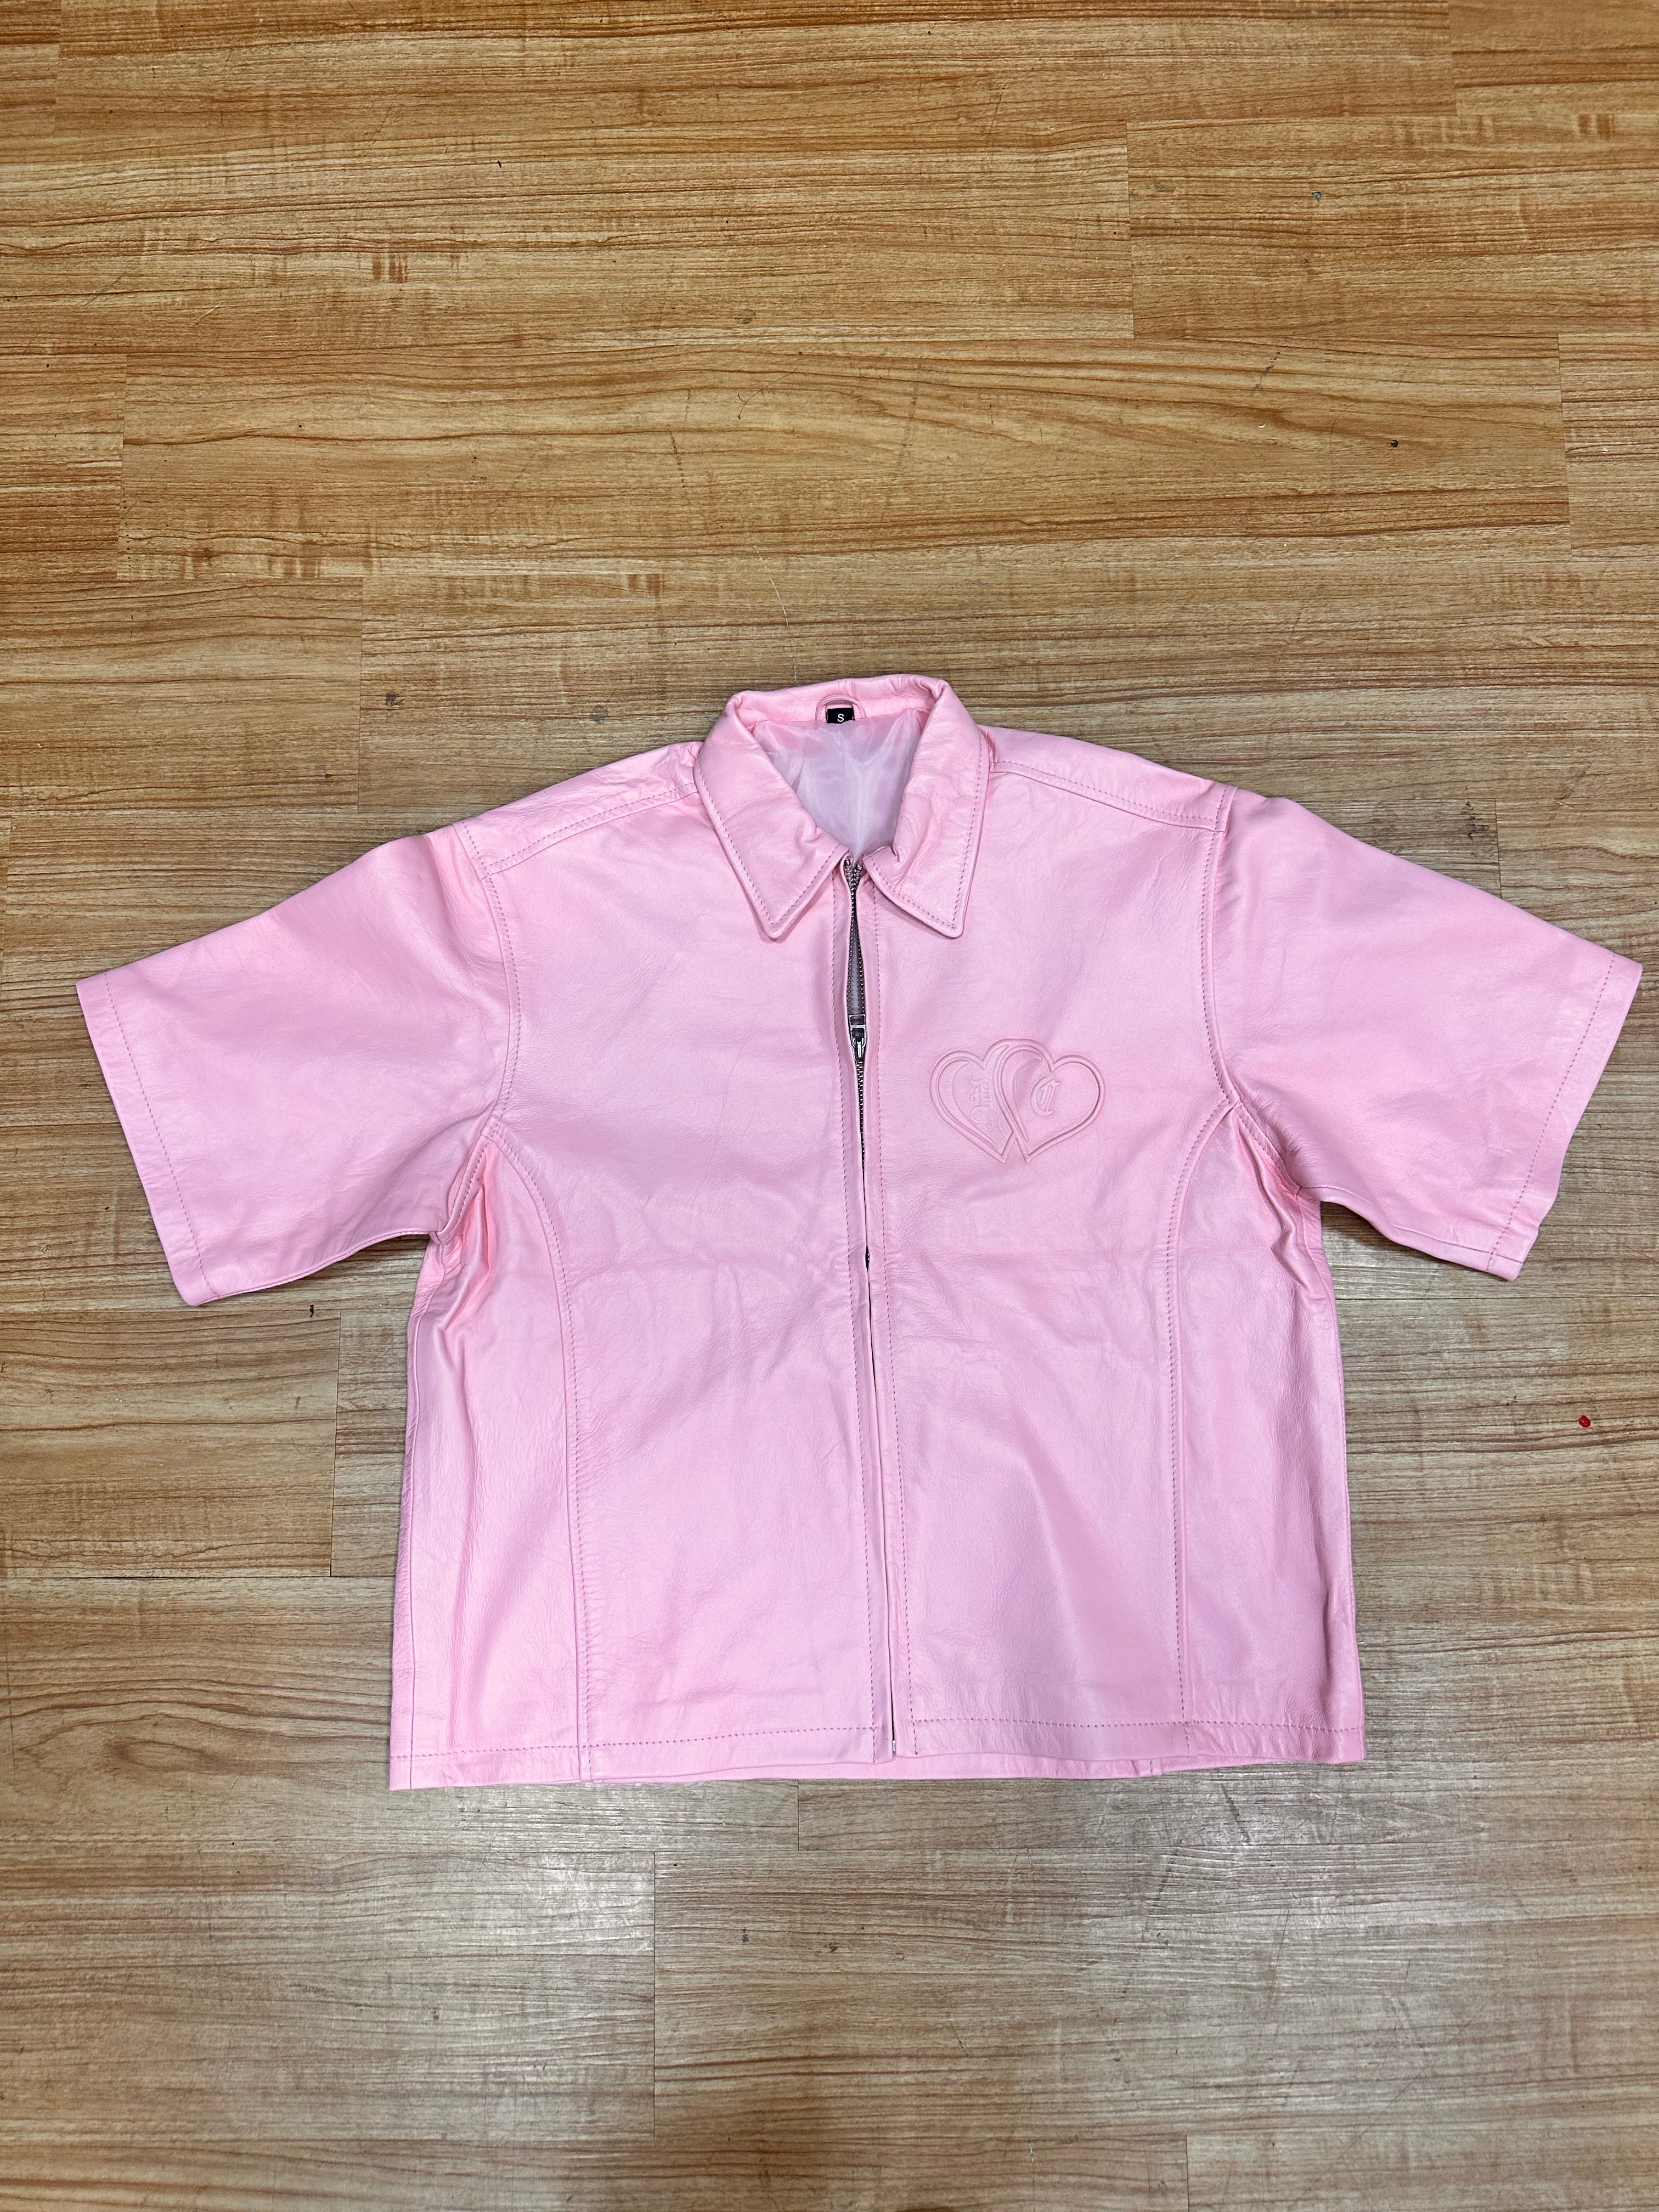 Leather Top (Breast Cancer Pink) (All Proceeds will be donated to a local patient battling breast cancer)